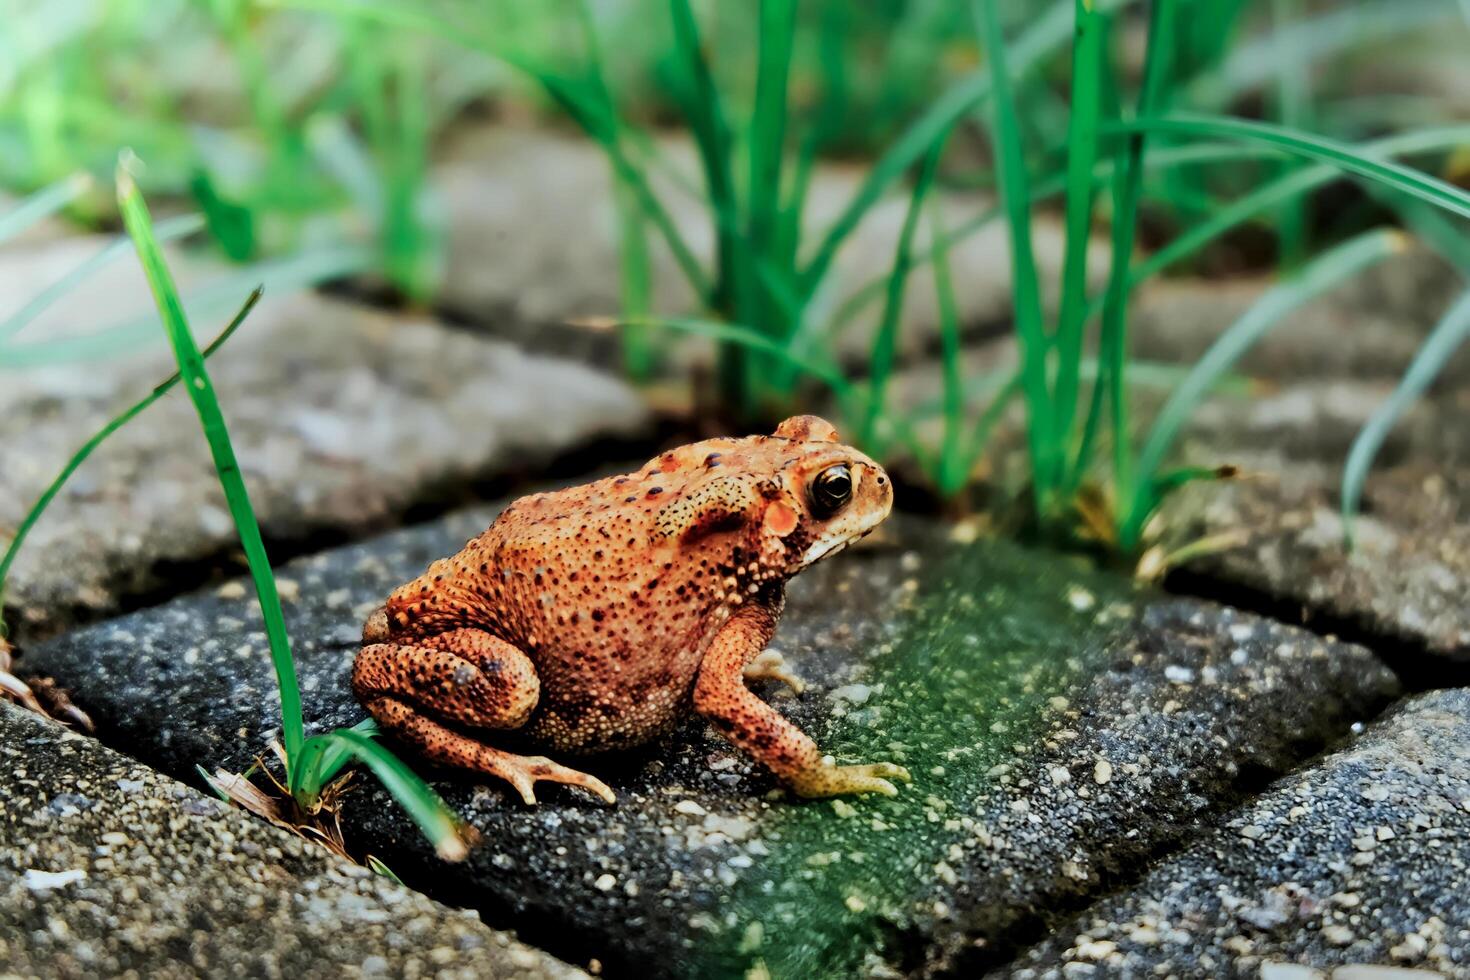 close up of a frog sitting among the grass photo